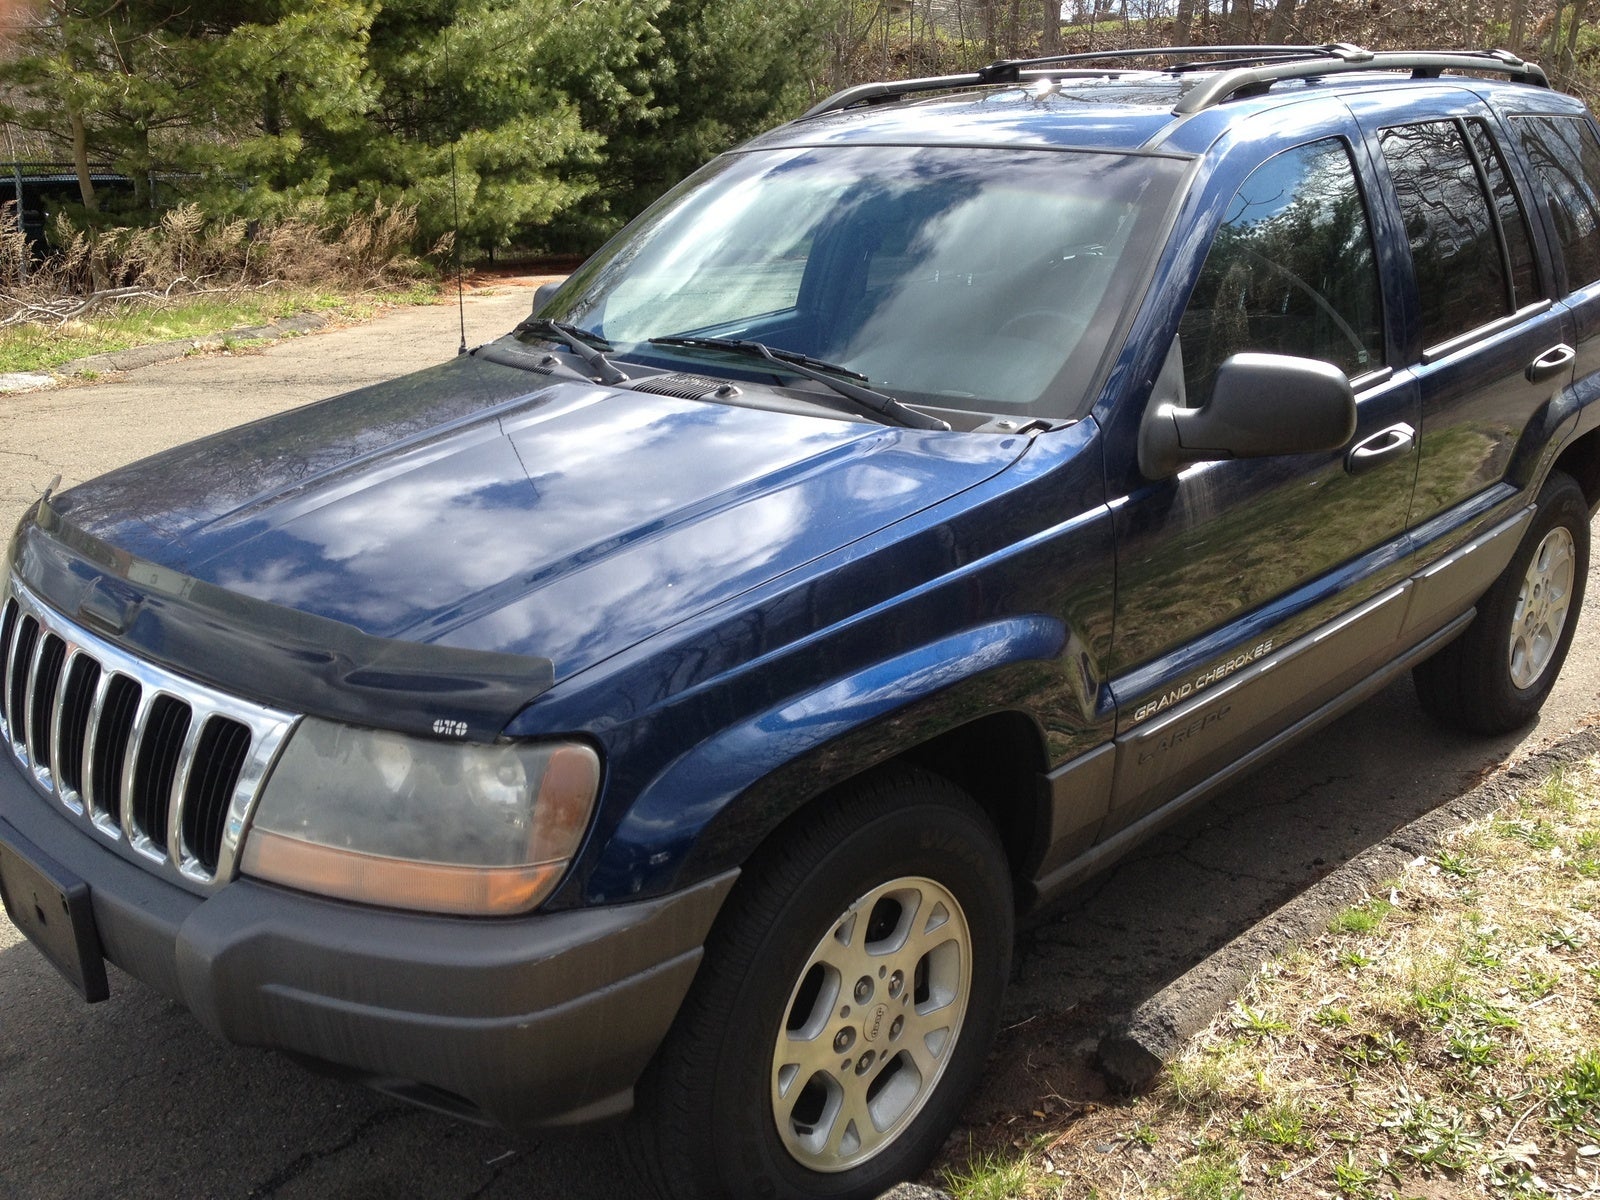 Jeep Grand Cherokee Questions - looking at buying a 2001 jeep grand